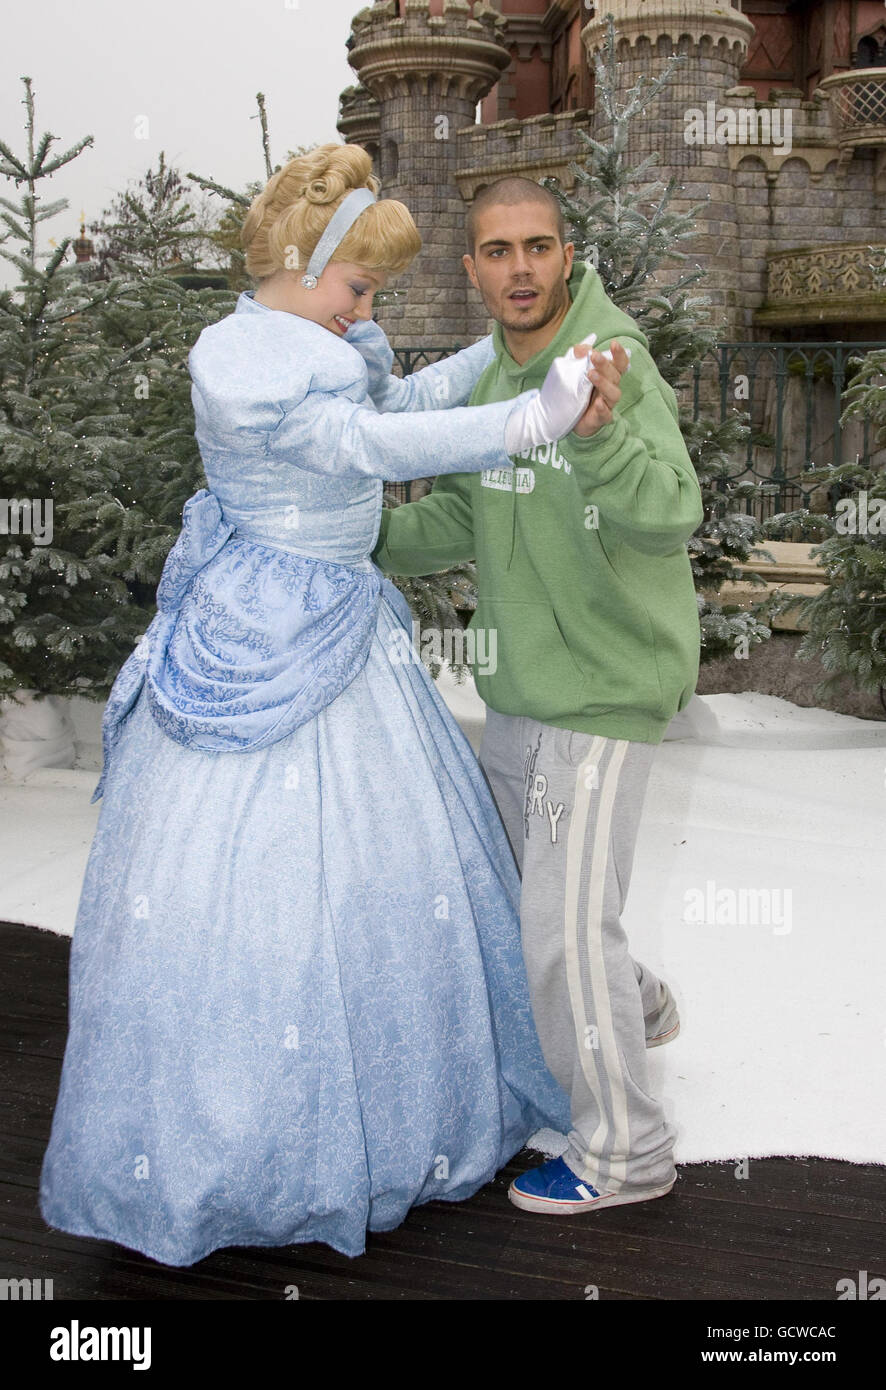 Max from The Wanted with Disney Princess during a visit to Disneyland Paris in France. Stock Photo